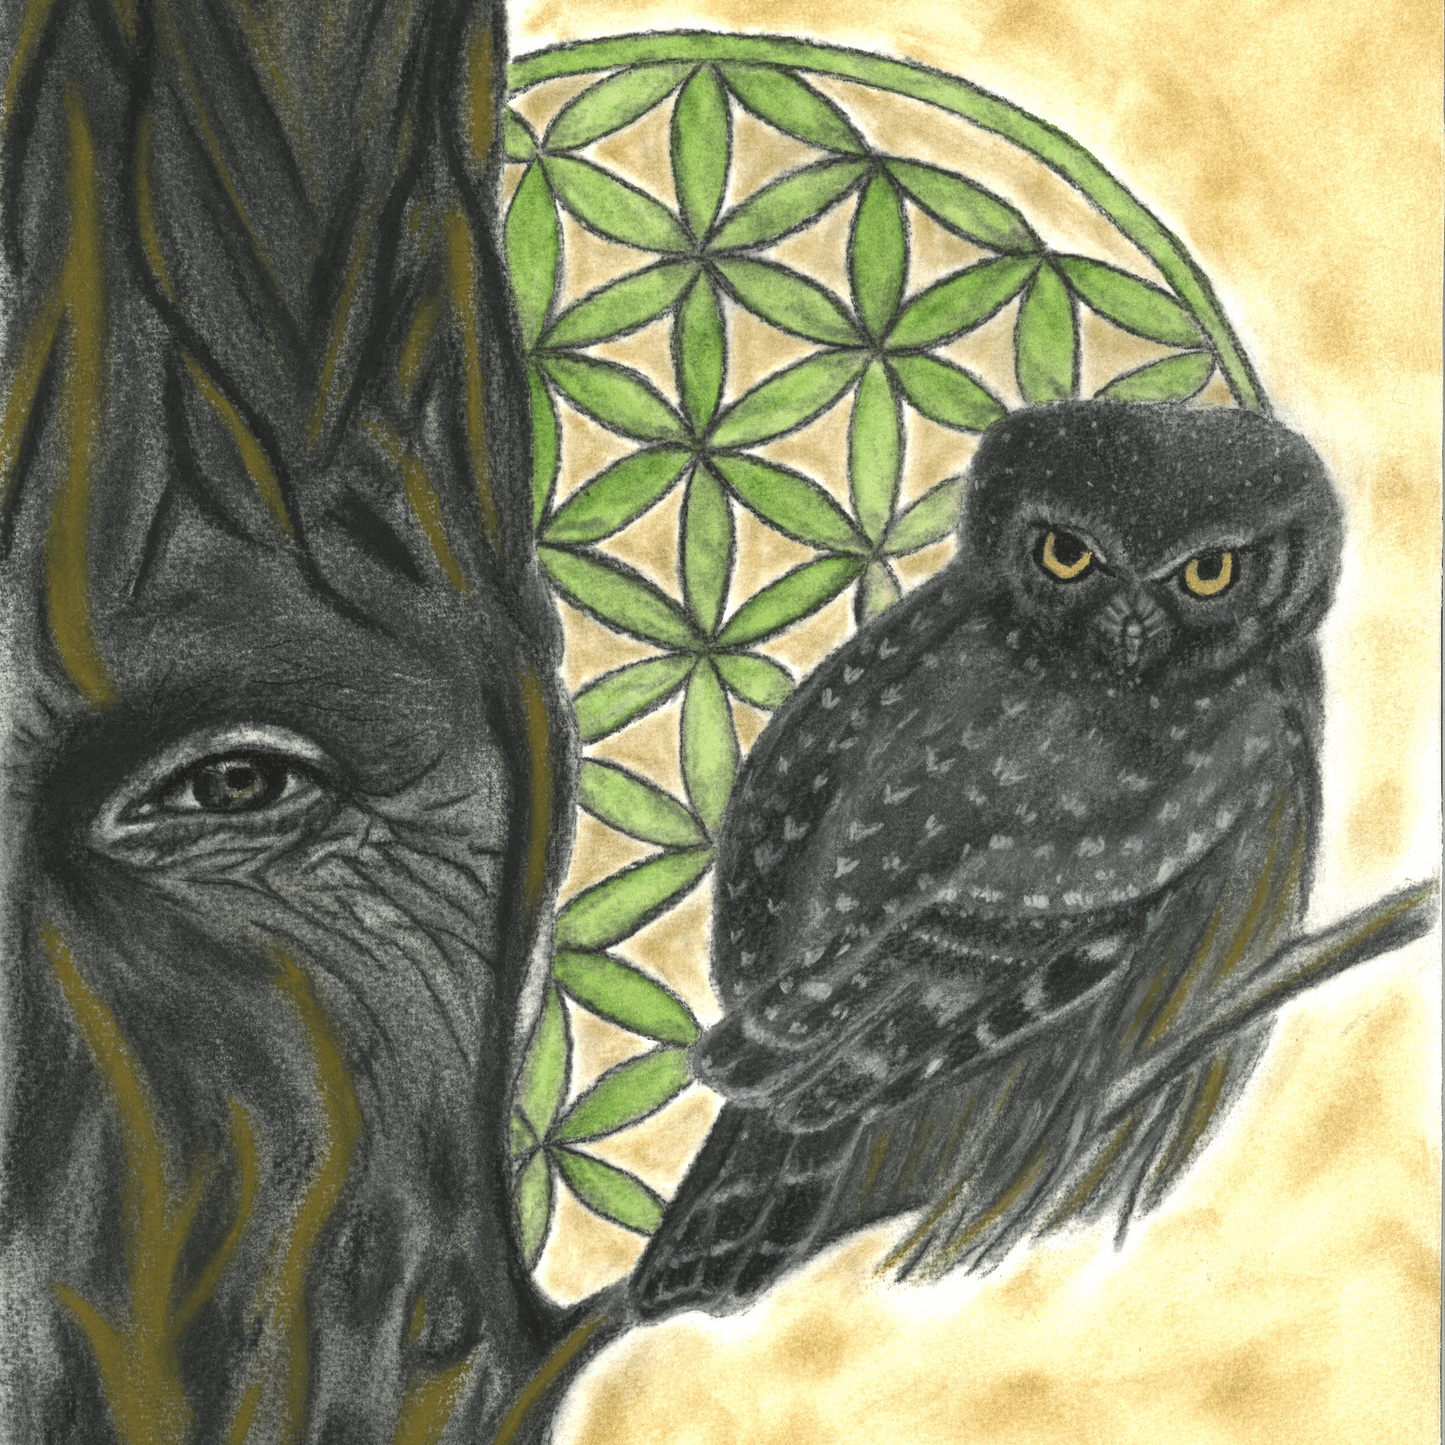 Limited edition art print. A magnificent tree, adorned with a watchful eye, takes center stage. Perched gracefully upon its branch, an owl with golden gouache eyes presides over the realm, guardian of secrets untold.